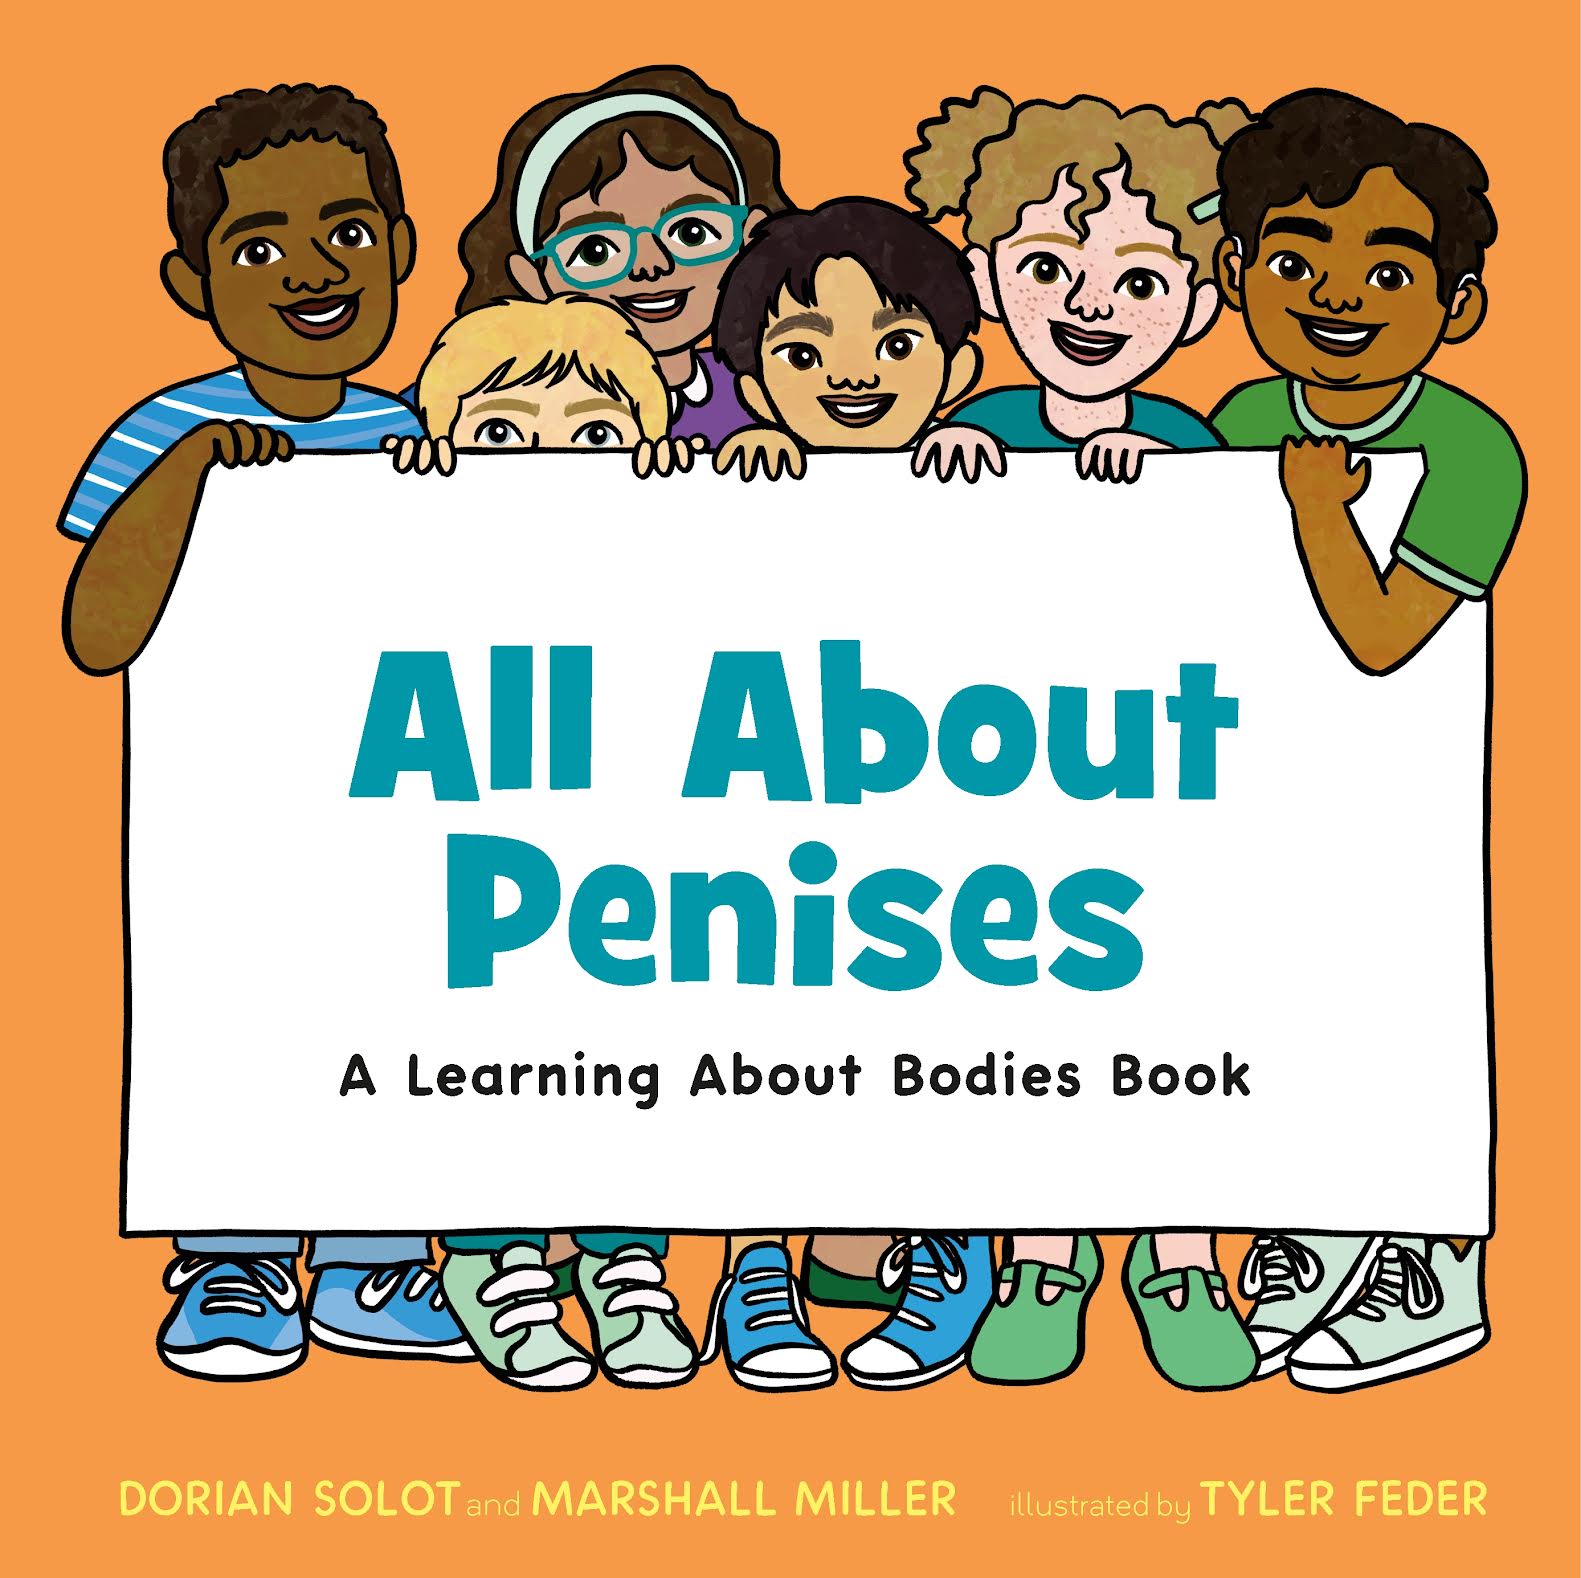 Sexuality Educators Writing for the Youngest of Readers: A Q&A with Dorian Solot and Marshall Miller on All About Penises, Vulvas, and Vaginas